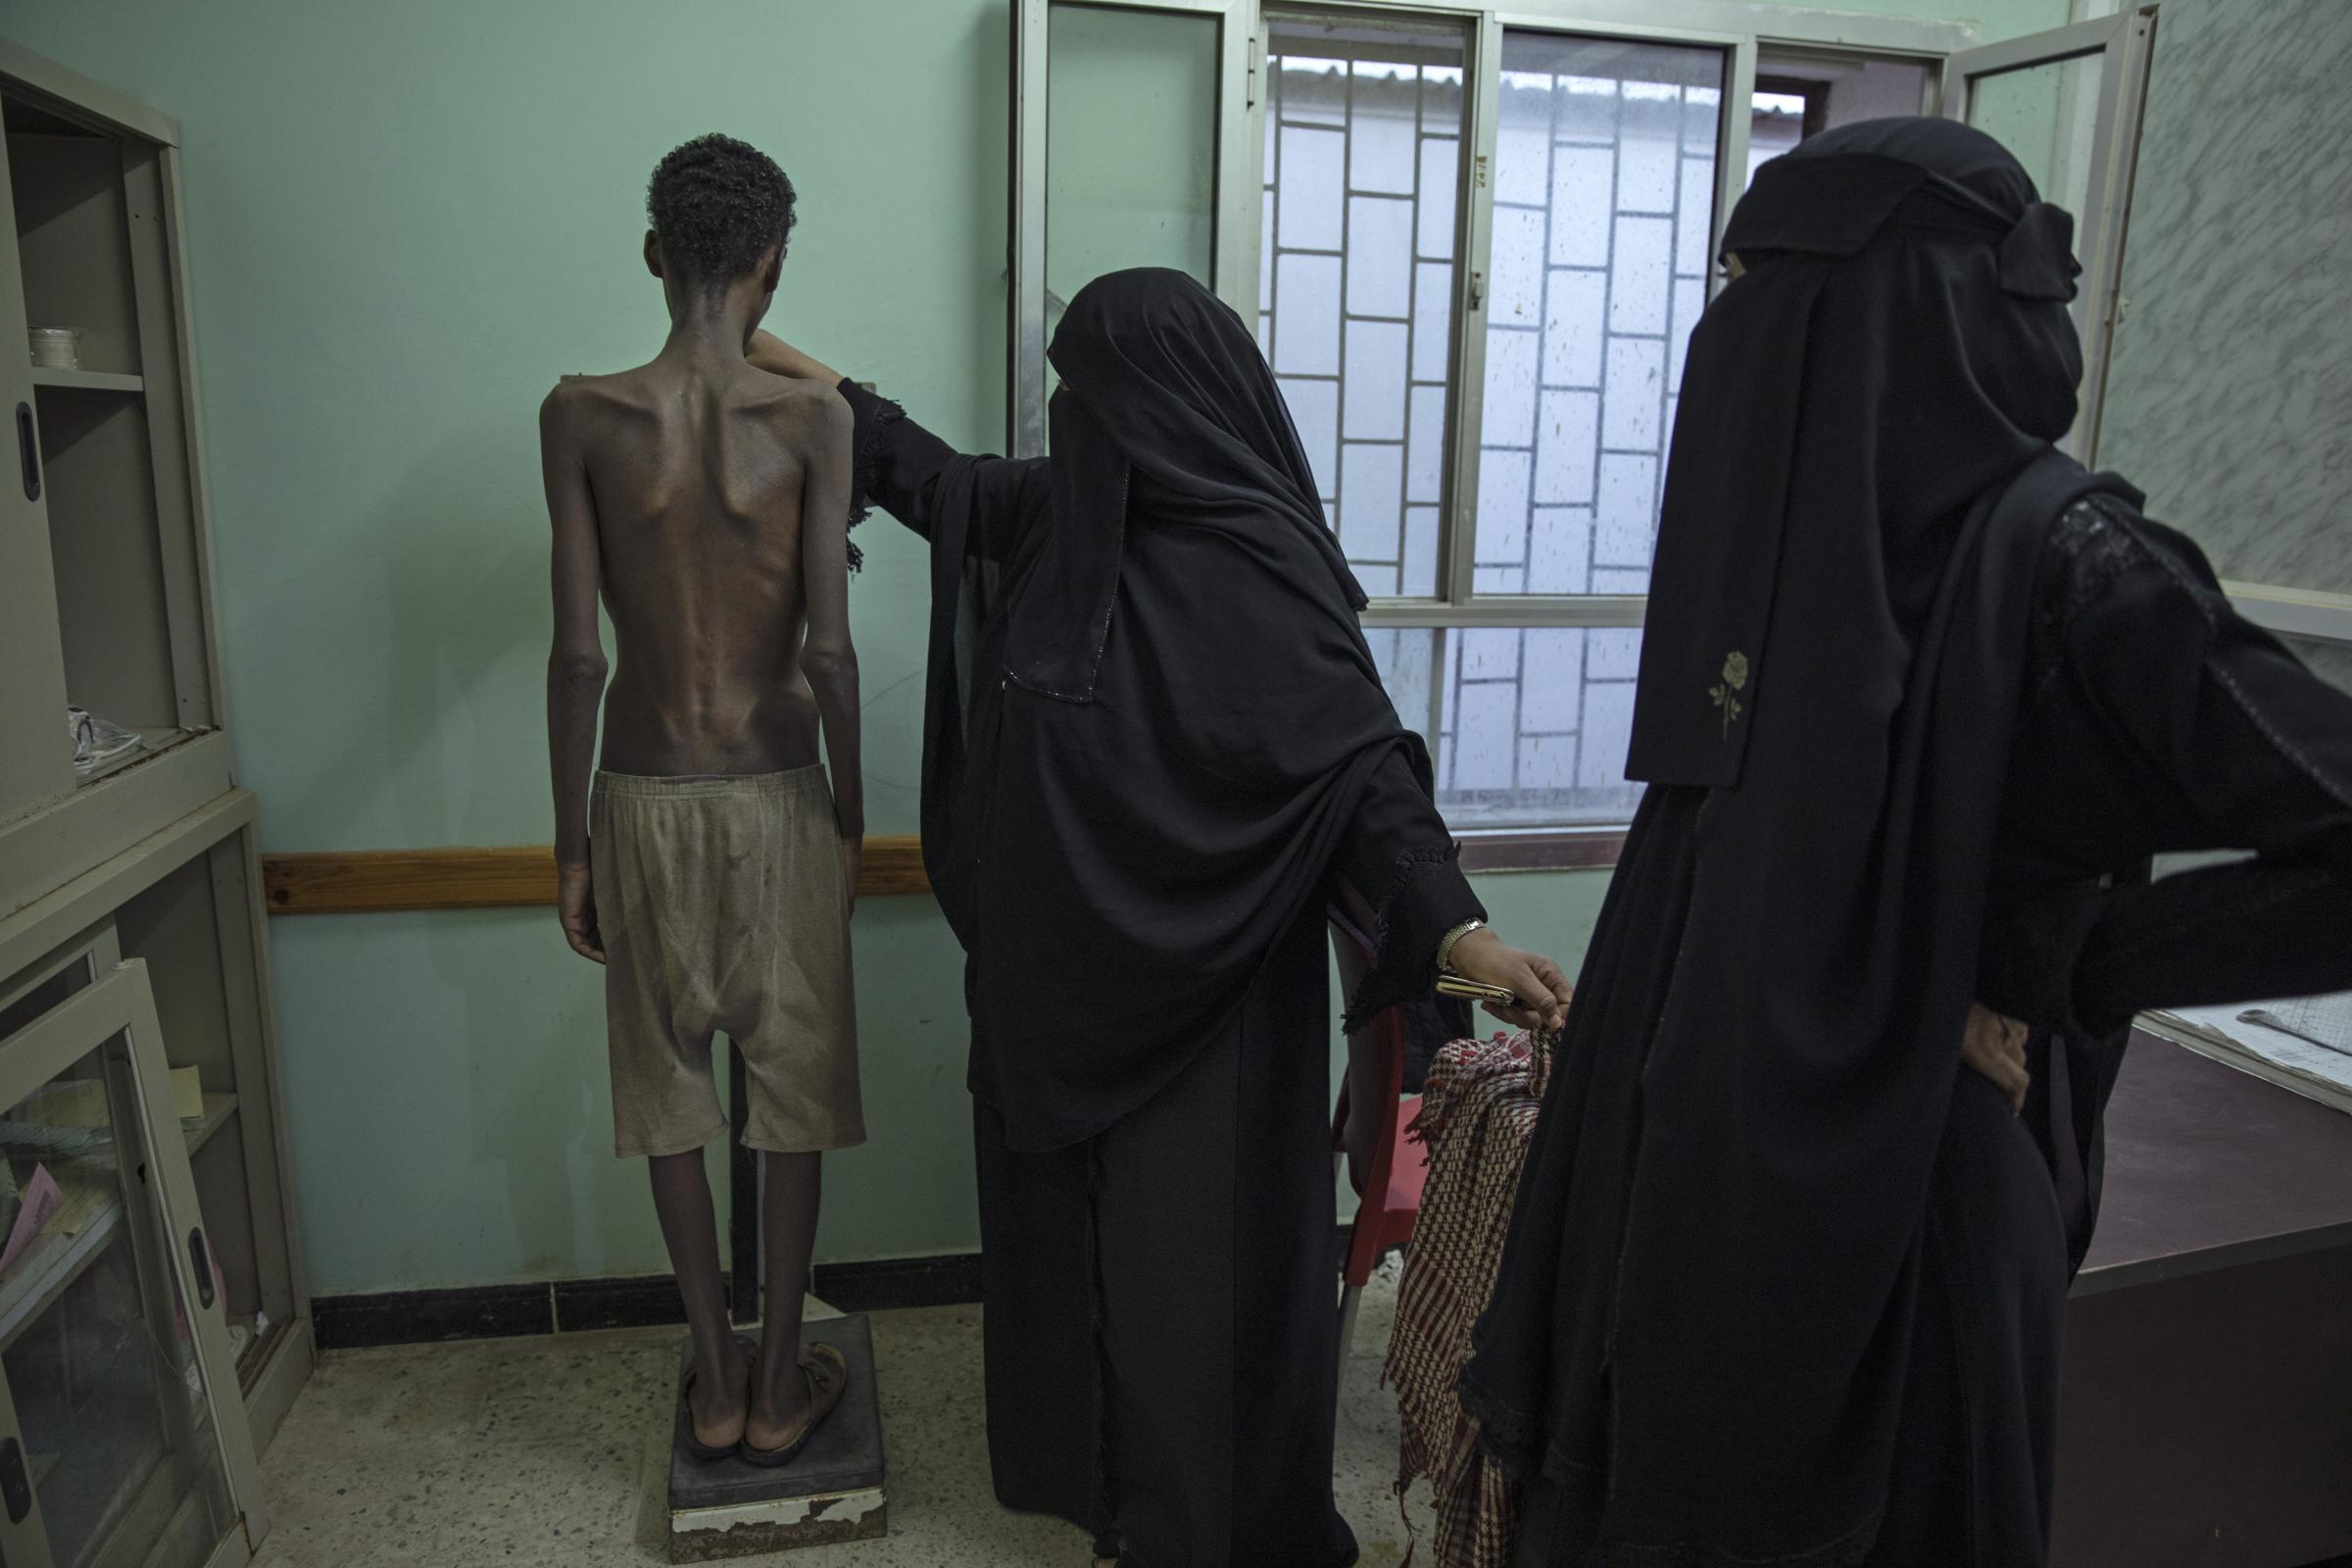  Mohammed Hussein, severely malnourished from imprisonment by smugglers, stands on a scale at the Ras al-Ara Hospital in Lahj, Yemen. He weighs 31 kilograms (68 pounds). Starvation is a punishment used by the traffickers to wear down their victims. 